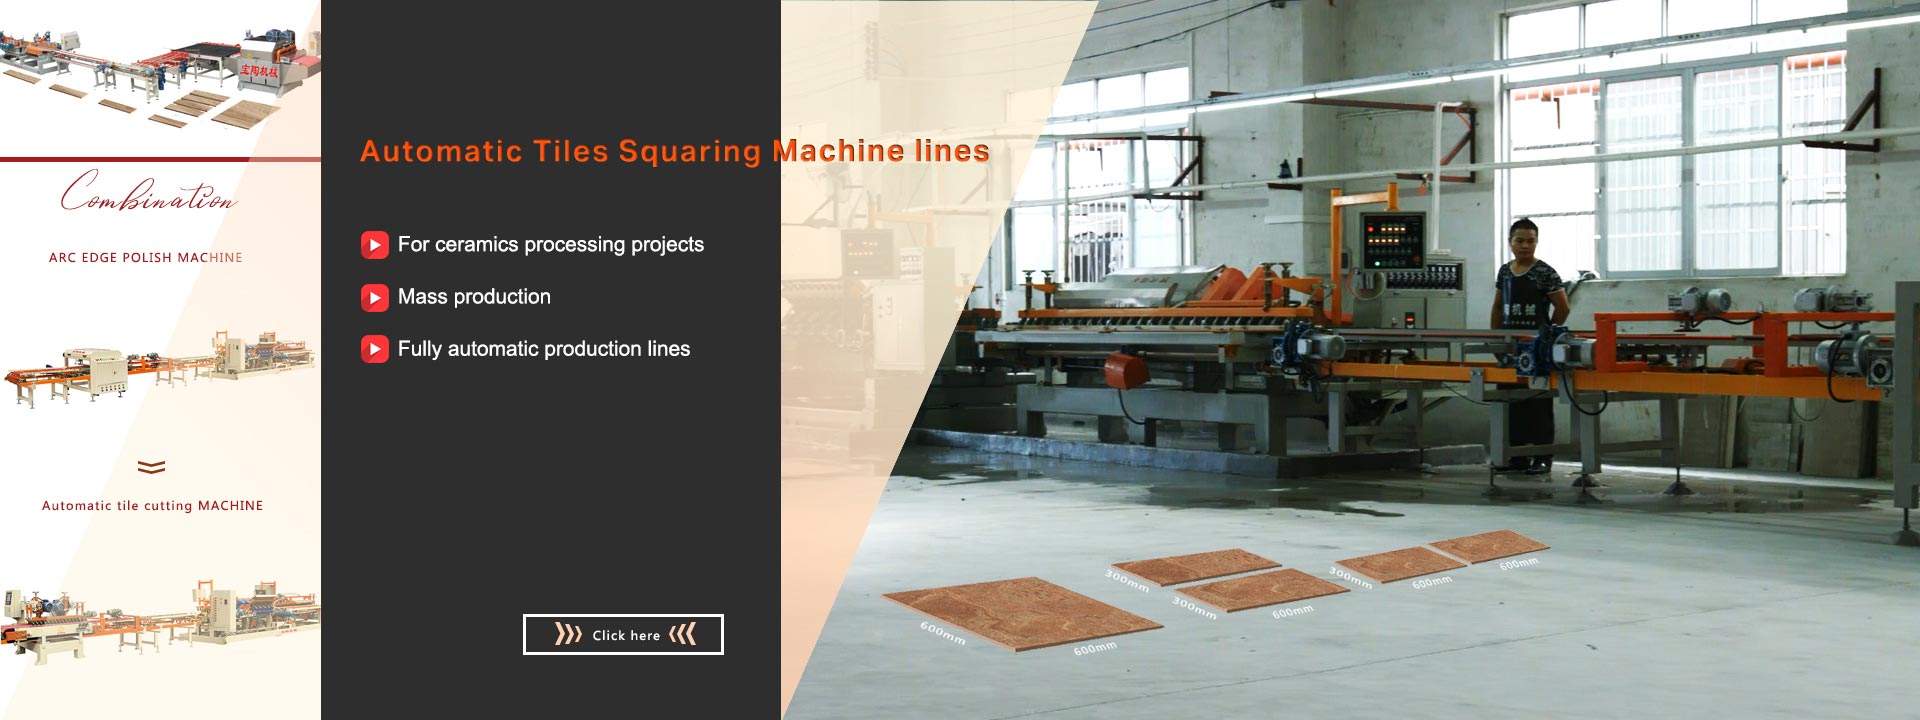 Tiles squaring machine lines For ceramics processing projects Mass production Fully automatic